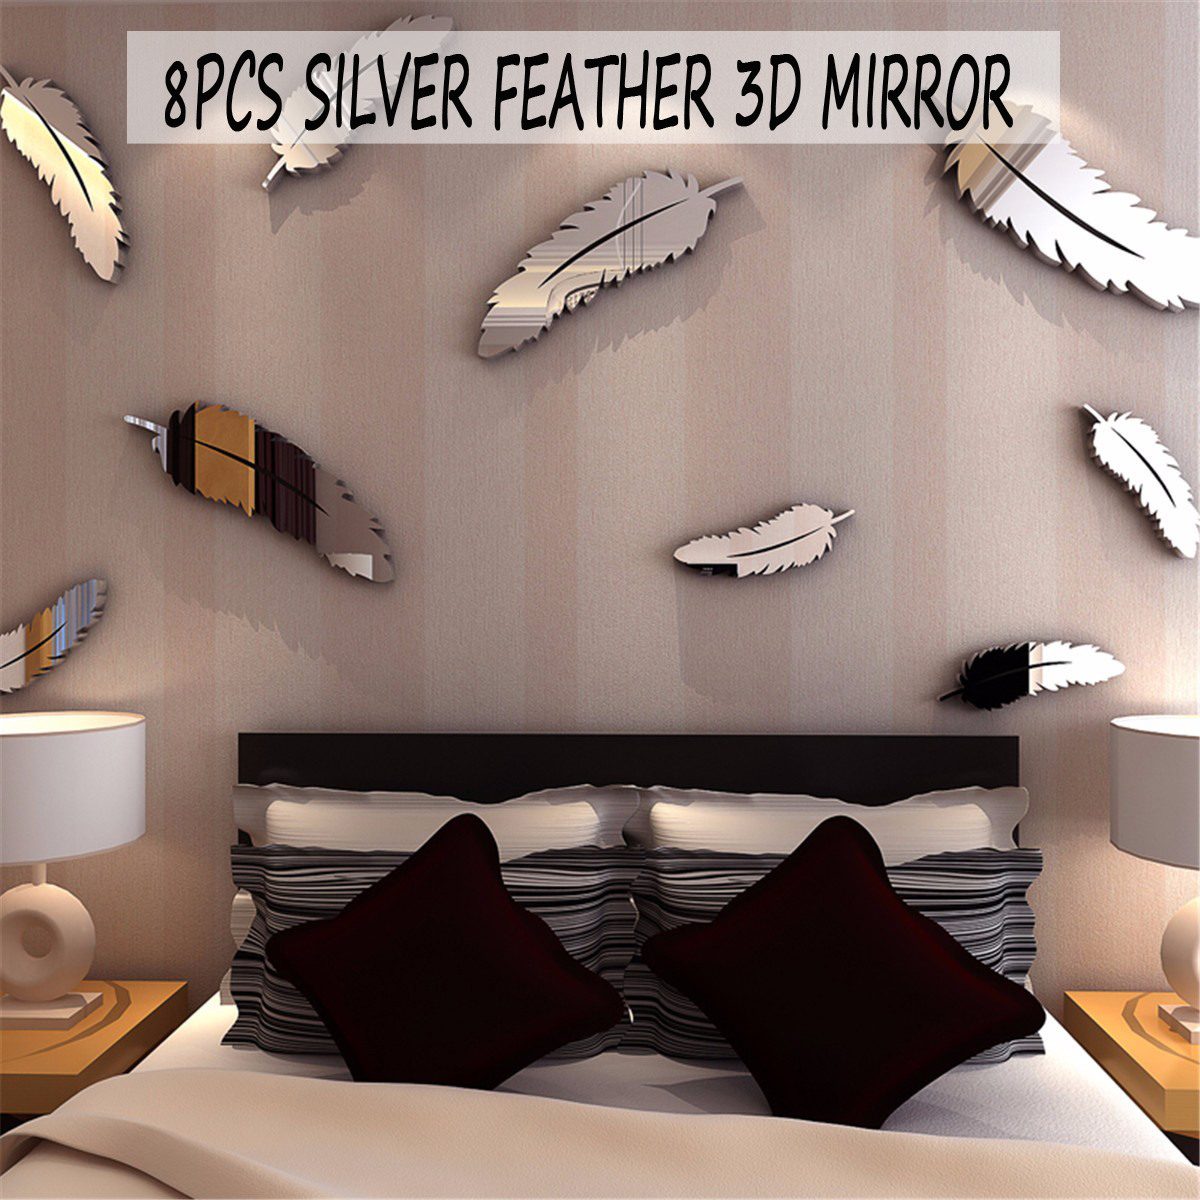 Acrylic Feather Mirror Wall Stickers Home Room DIY Mural Decor Art Sticker 